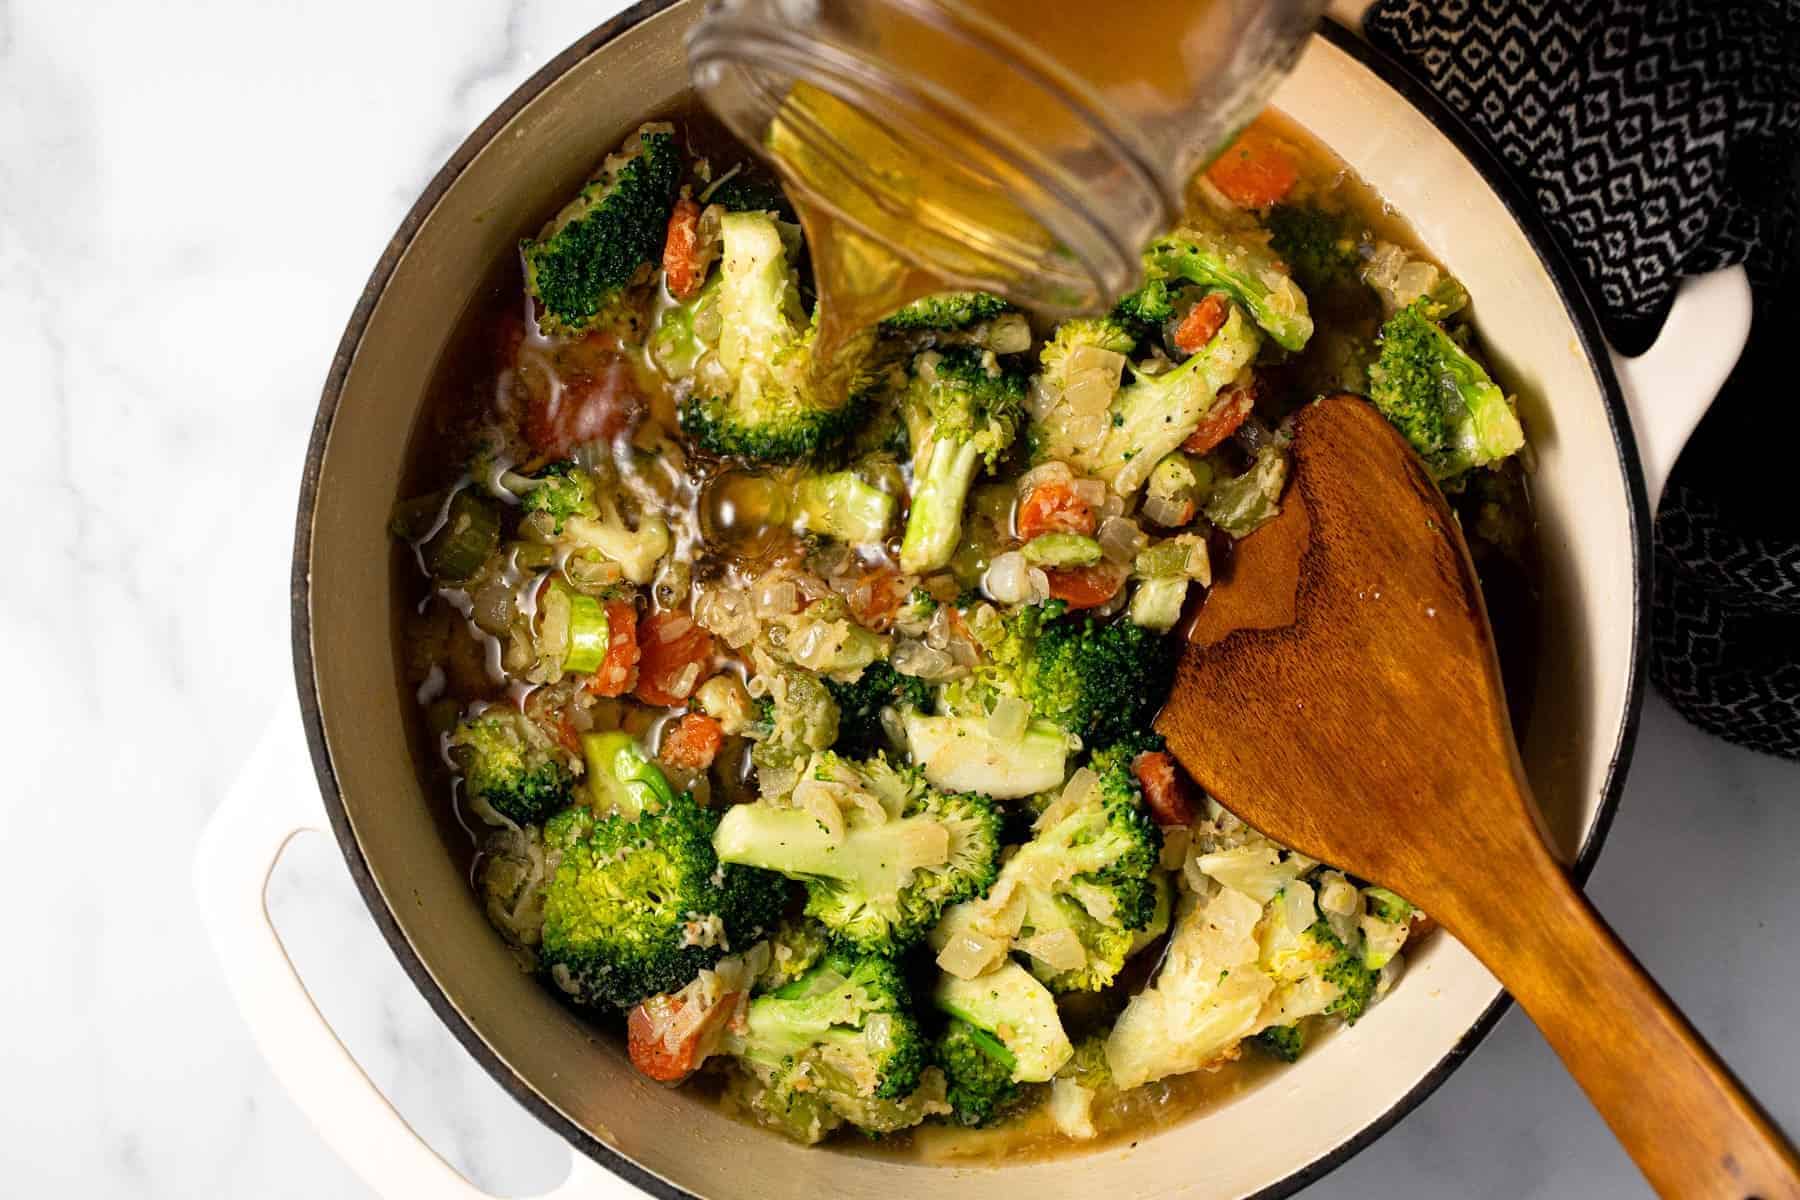 Large pot filled with ingredients to make homemade broccoli cheddar soup